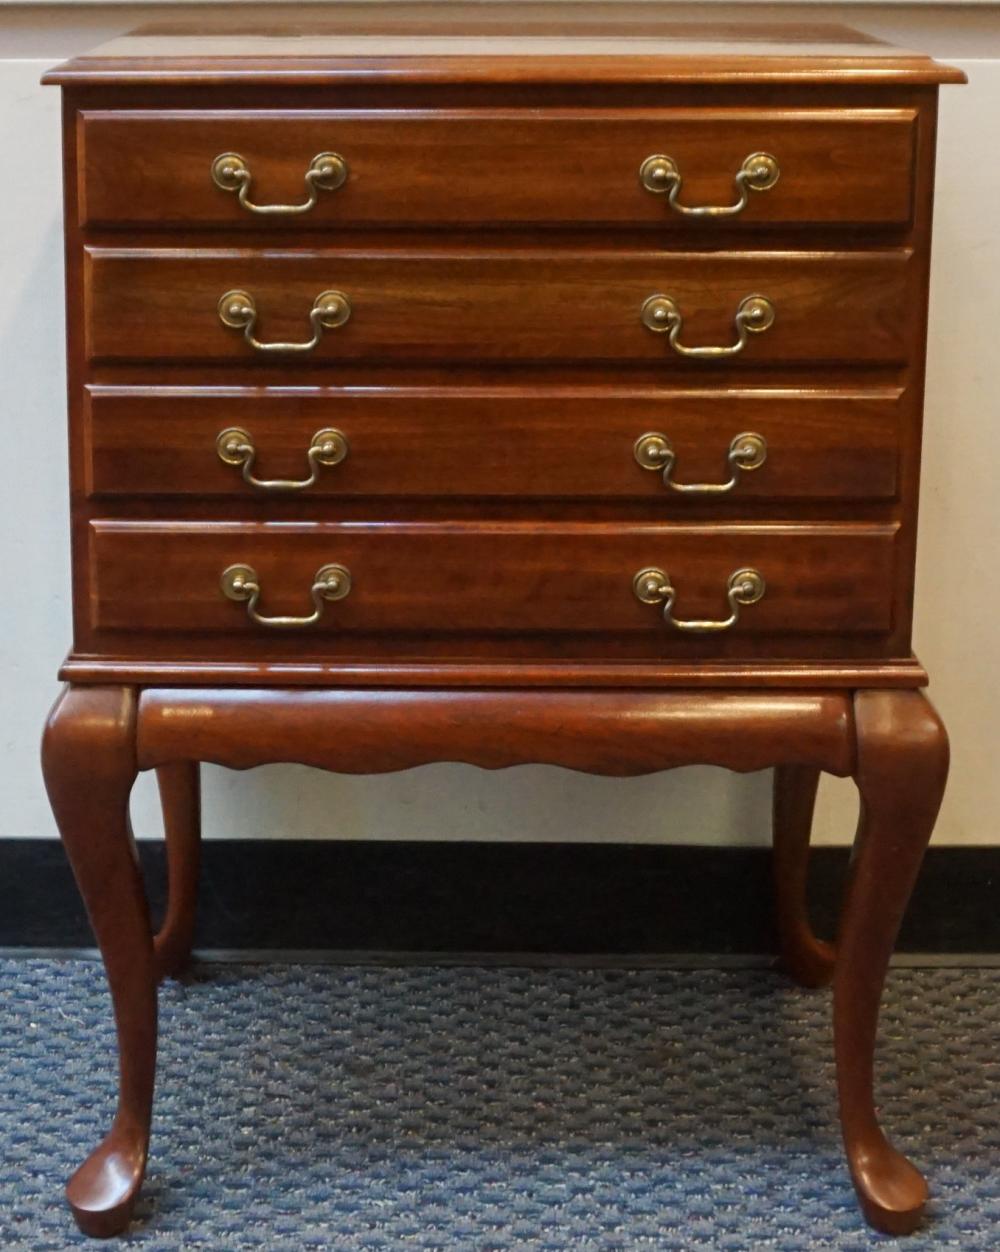 QUEEN ANNE STYLE CHERRY FOUR DRAWER